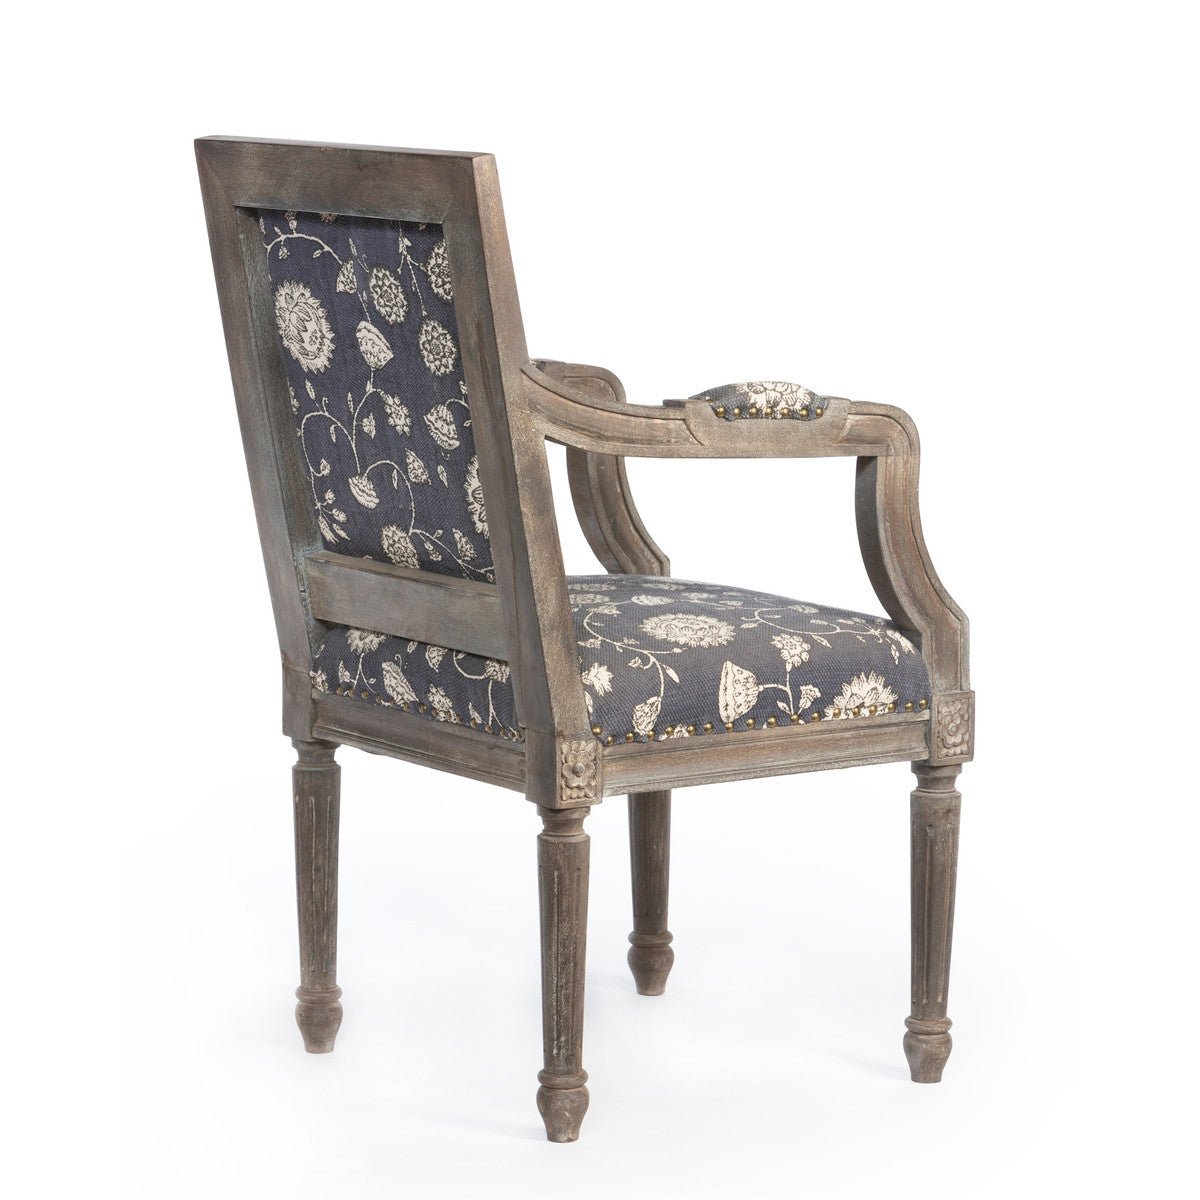 Floral Tapestry Upholstered Arm Chair